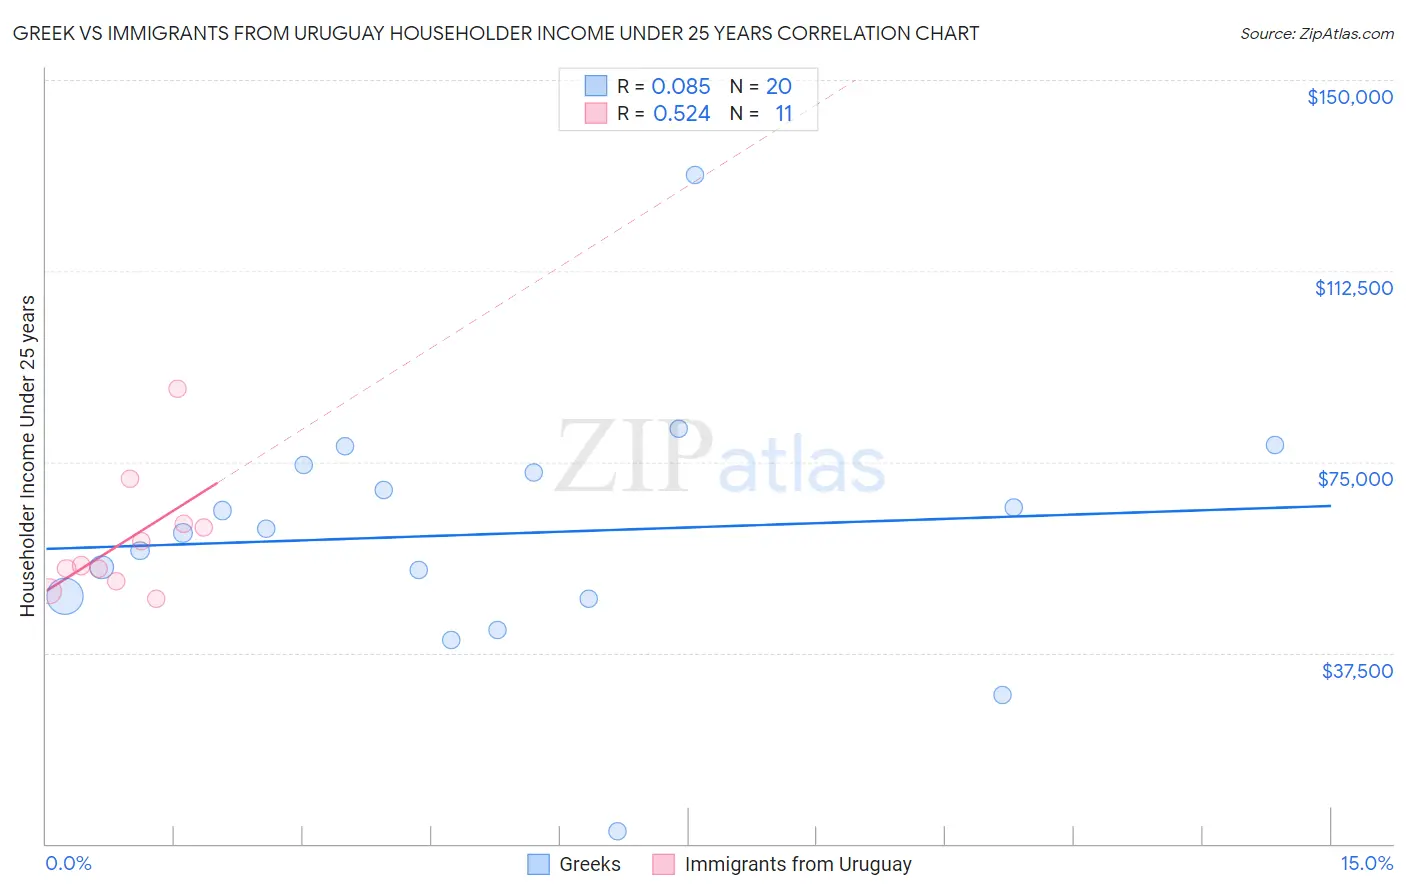 Greek vs Immigrants from Uruguay Householder Income Under 25 years